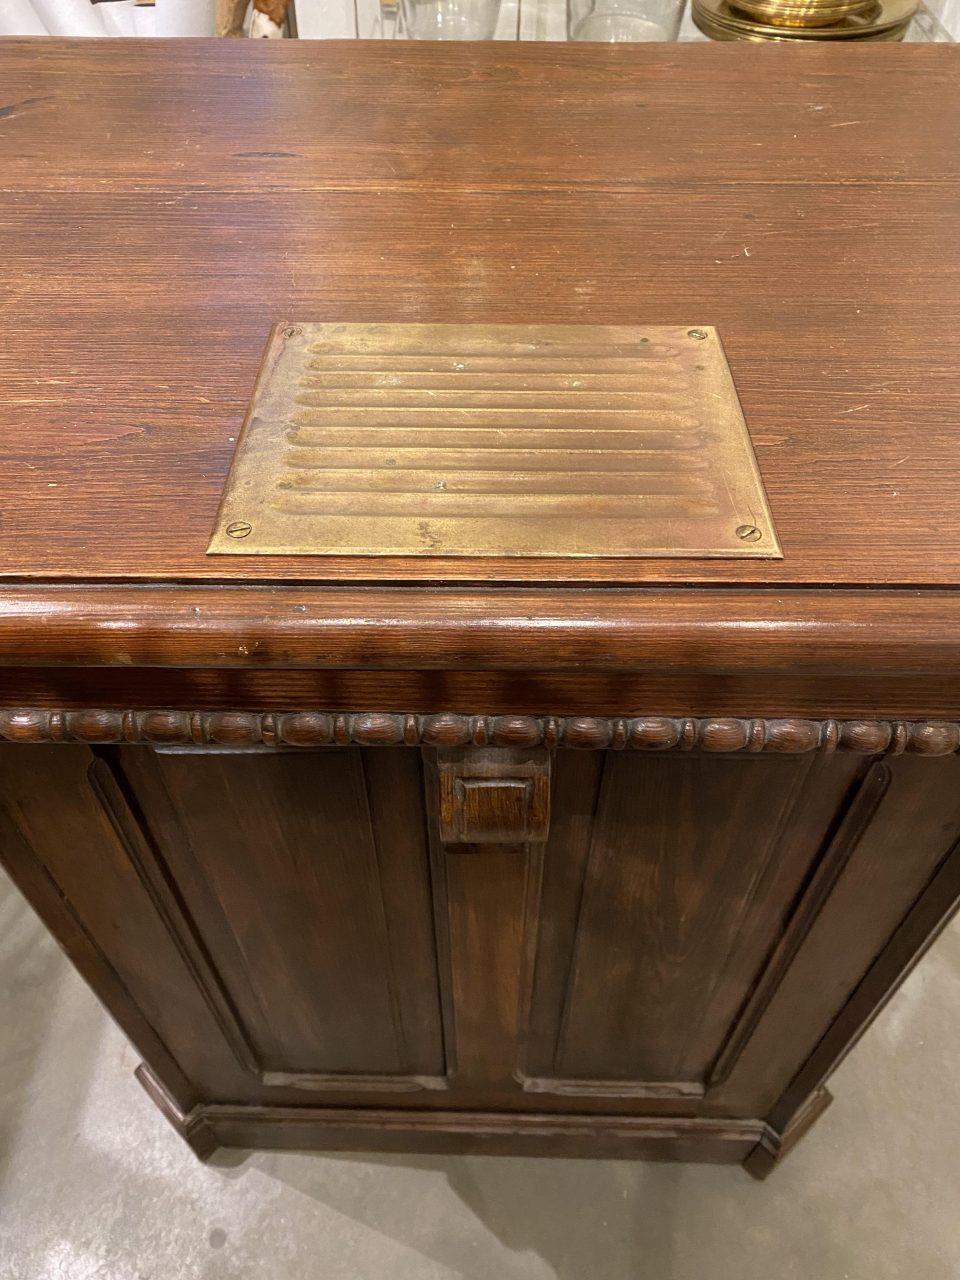 Authentic and charming French oak customer counter / desk. In its heyday would have stood in a brasserie / bistro in the gourmet city of Lyon, and welcomed expectant guests.

The almost 100-year-old bar counter is a piece of solid carpentry work,